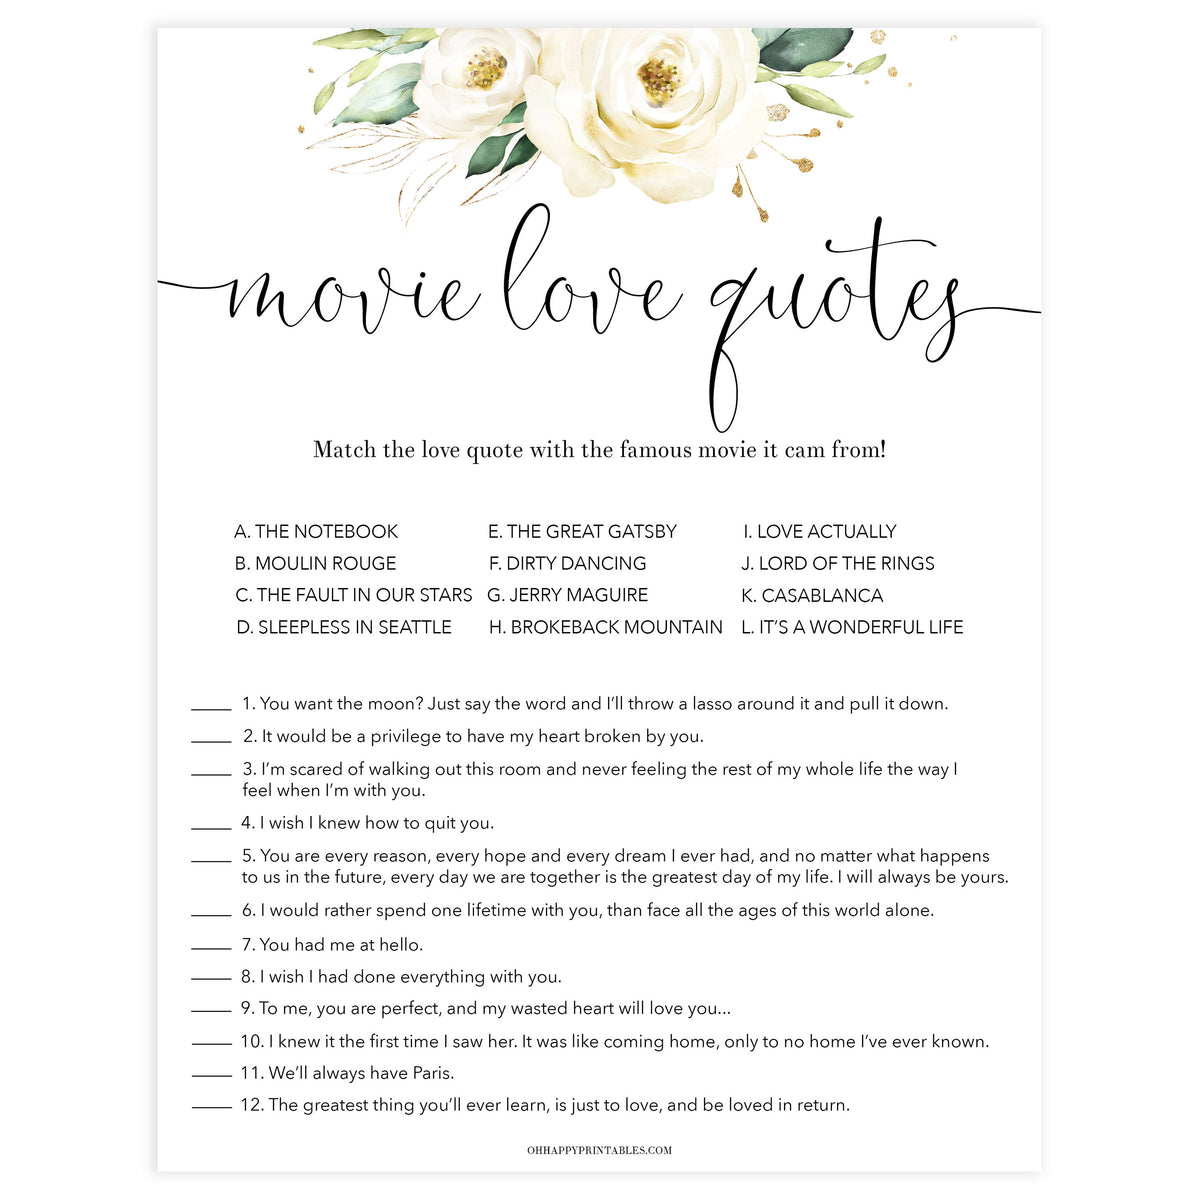 match the movie love quote game, Printable bridal shower games, floral bridal shower, floral bridal shower games, fun bridal shower games, bridal shower game ideas, floral bridal shower